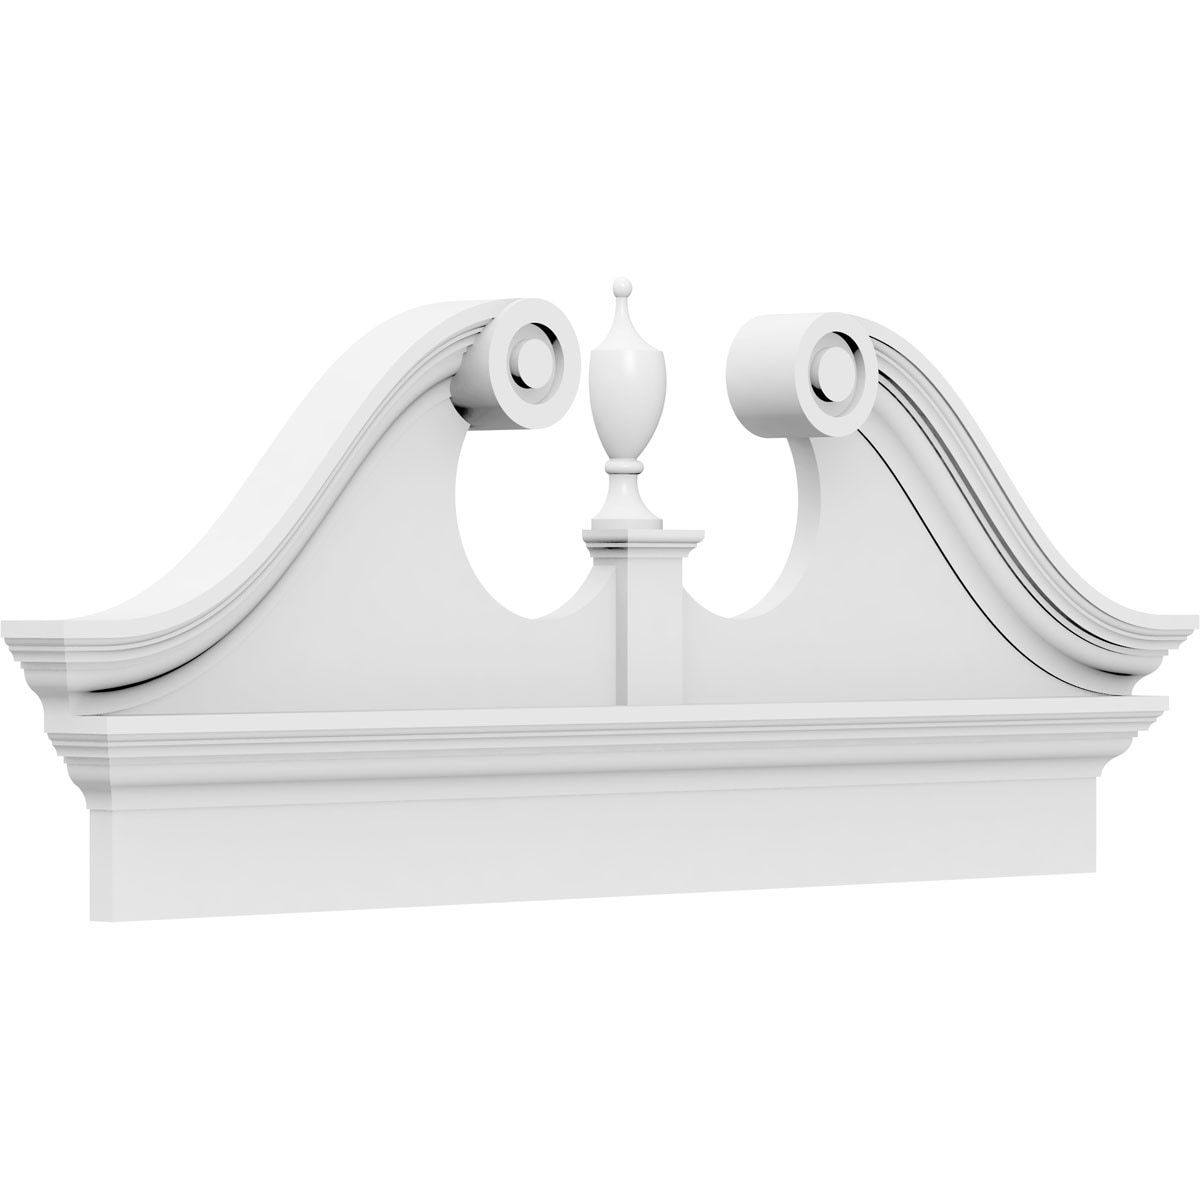 Ekena Millwork Rams Head 5-ft 4-in x 22-7/8-in Unfinished PVC Pediment Entry Door Casing Accent in White | PEDPC064X230RHP00